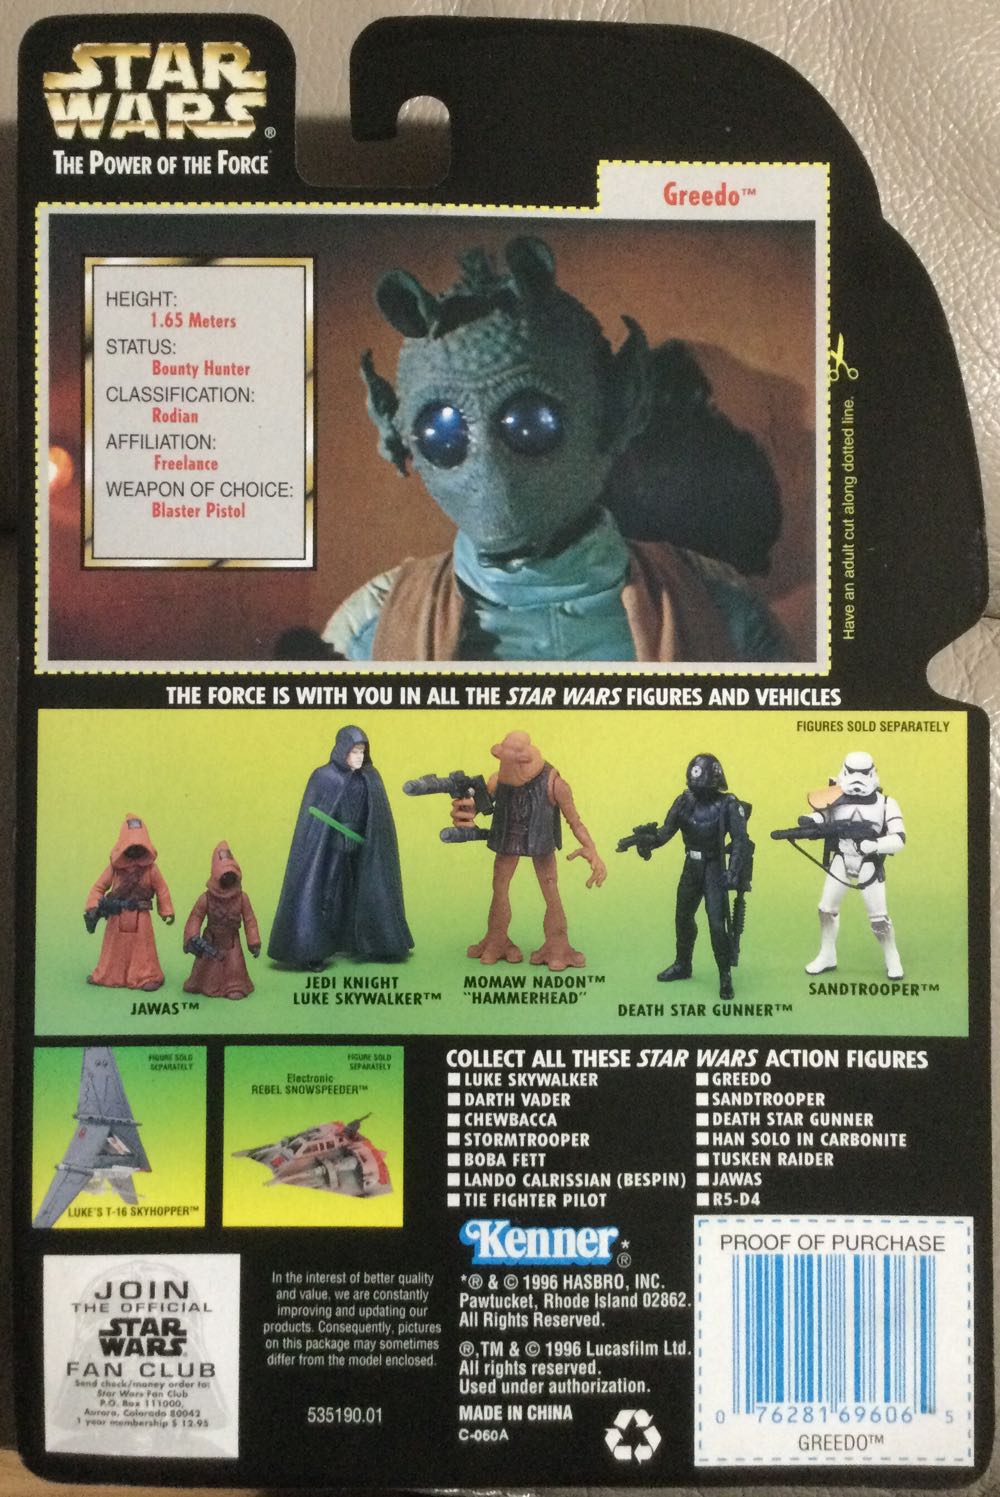 Power Of The Force (GC) - Greedo - Hasbro (A New Hope) action figure collectible - Main Image 2